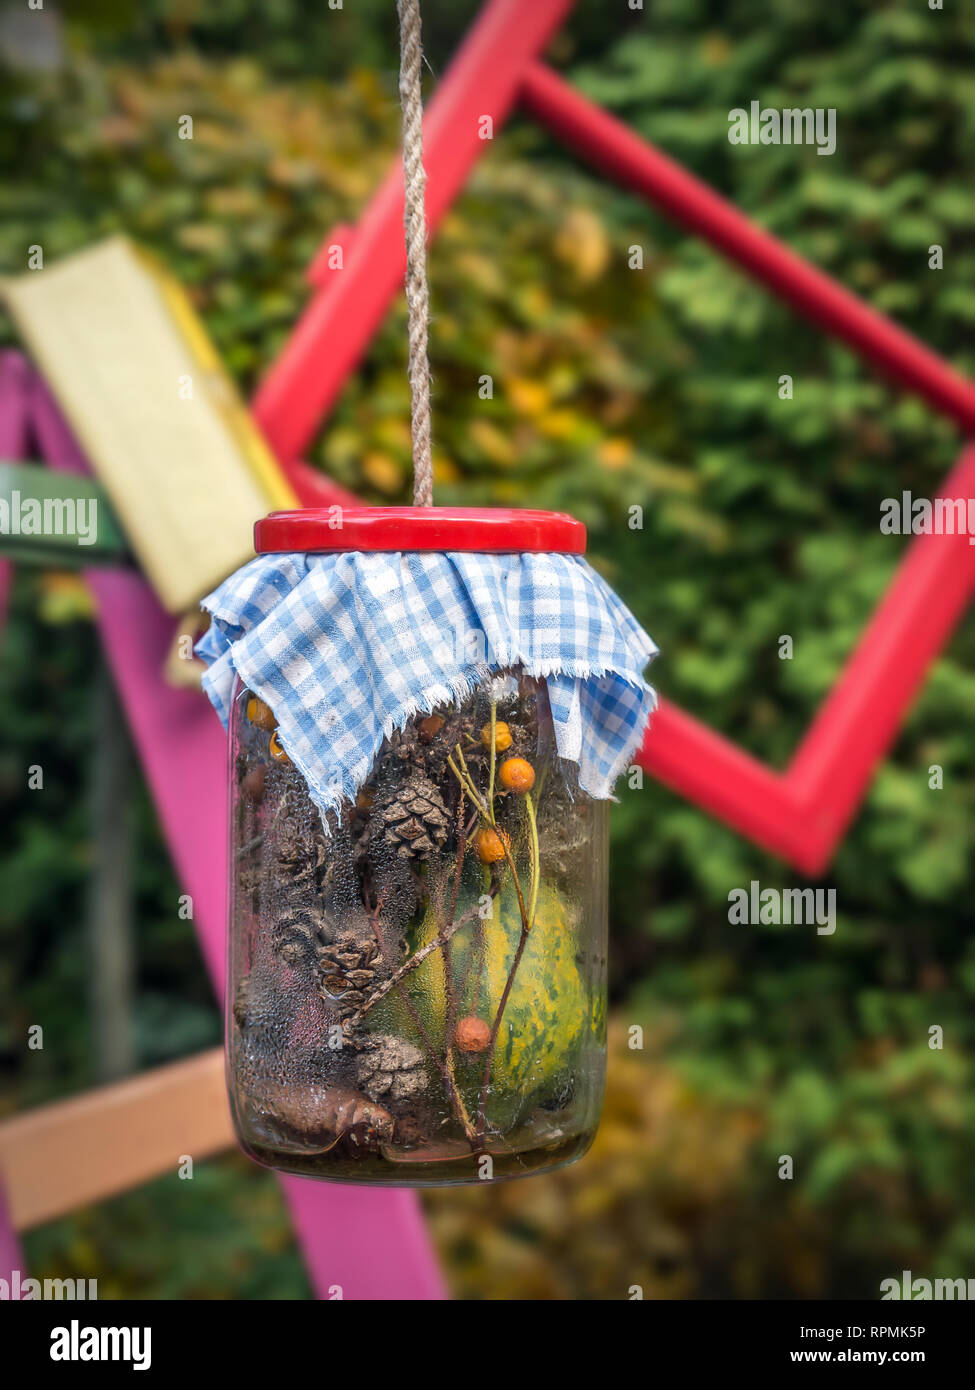 Old glass jar with organic decorations hanging on string in the garden Stock Photo